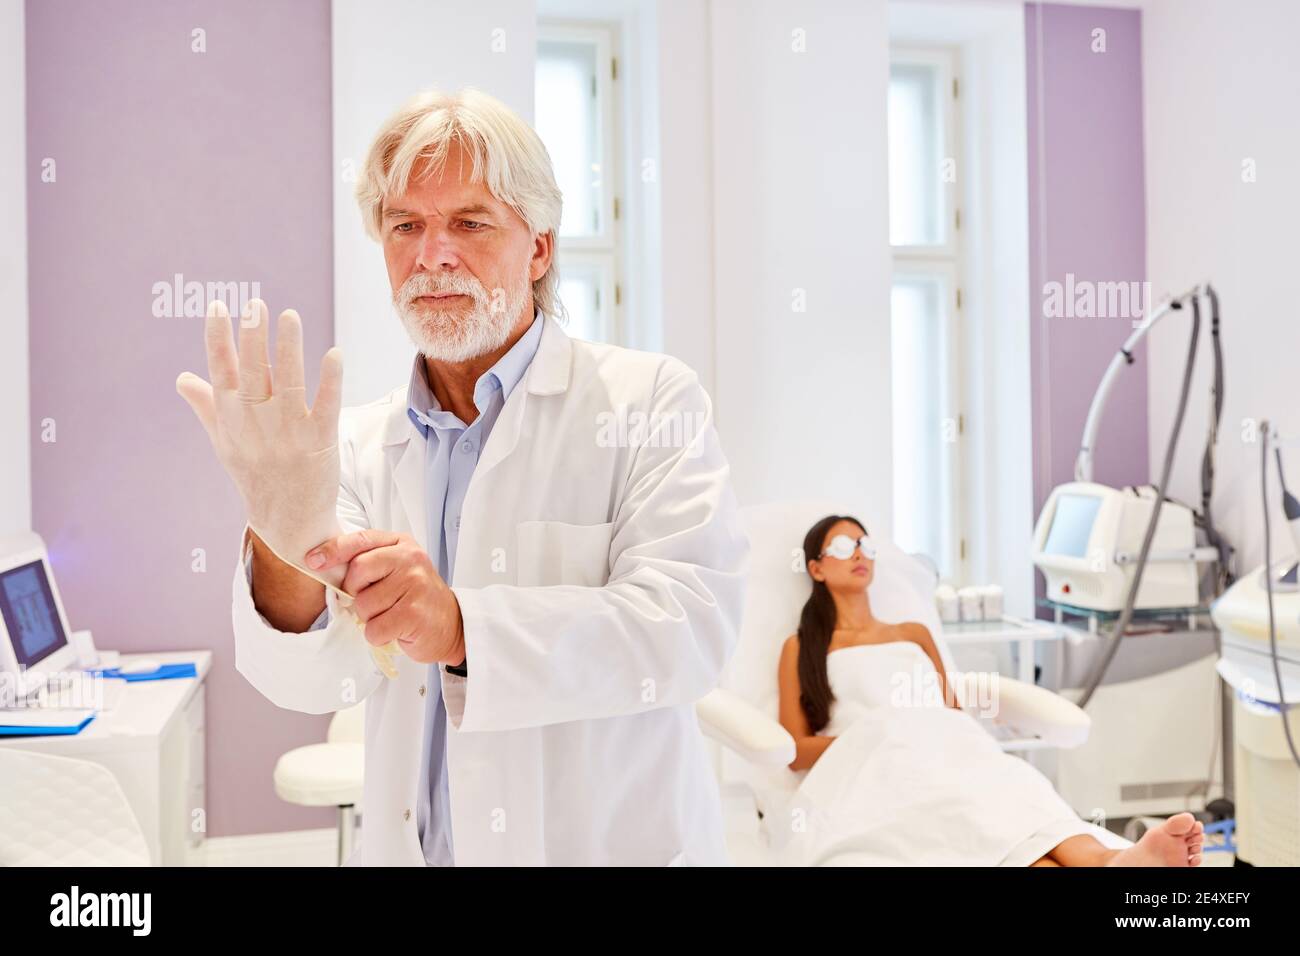 Dermatologist or beautician puts on gloves before the professional skin treatment Stock Photo